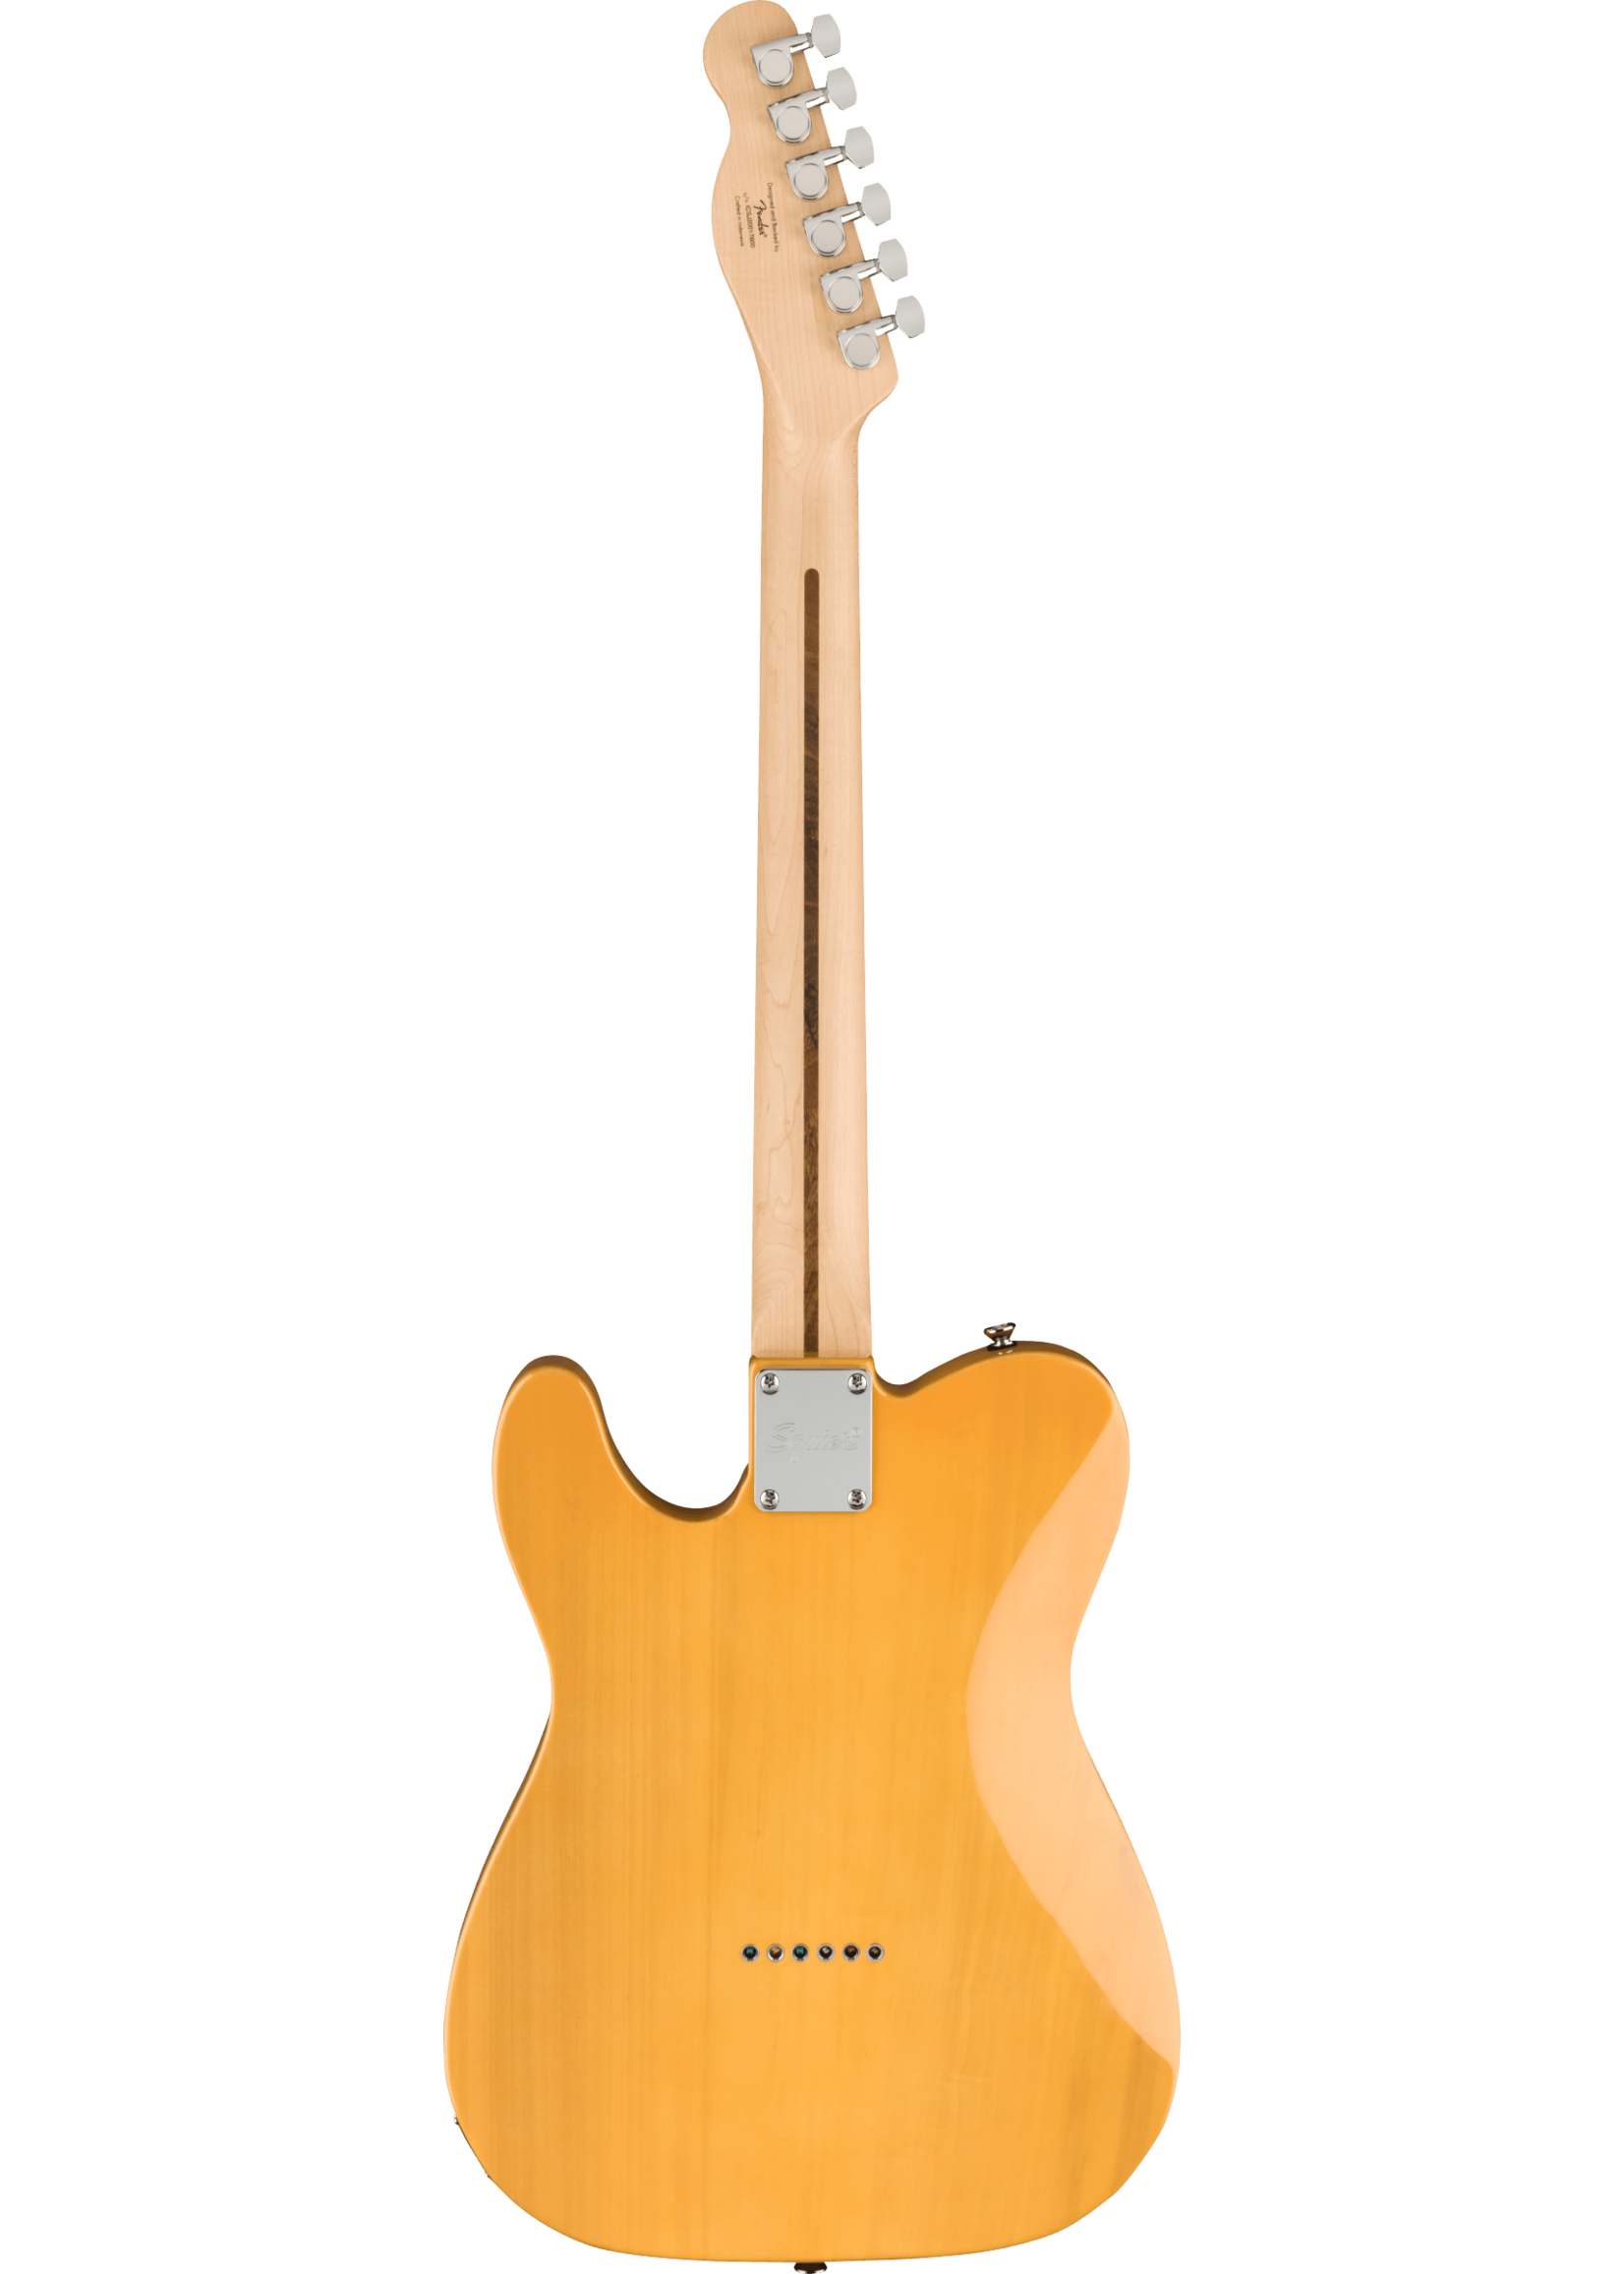 Fender Squier Affinity Series Telecaster - Butterscotch - North 